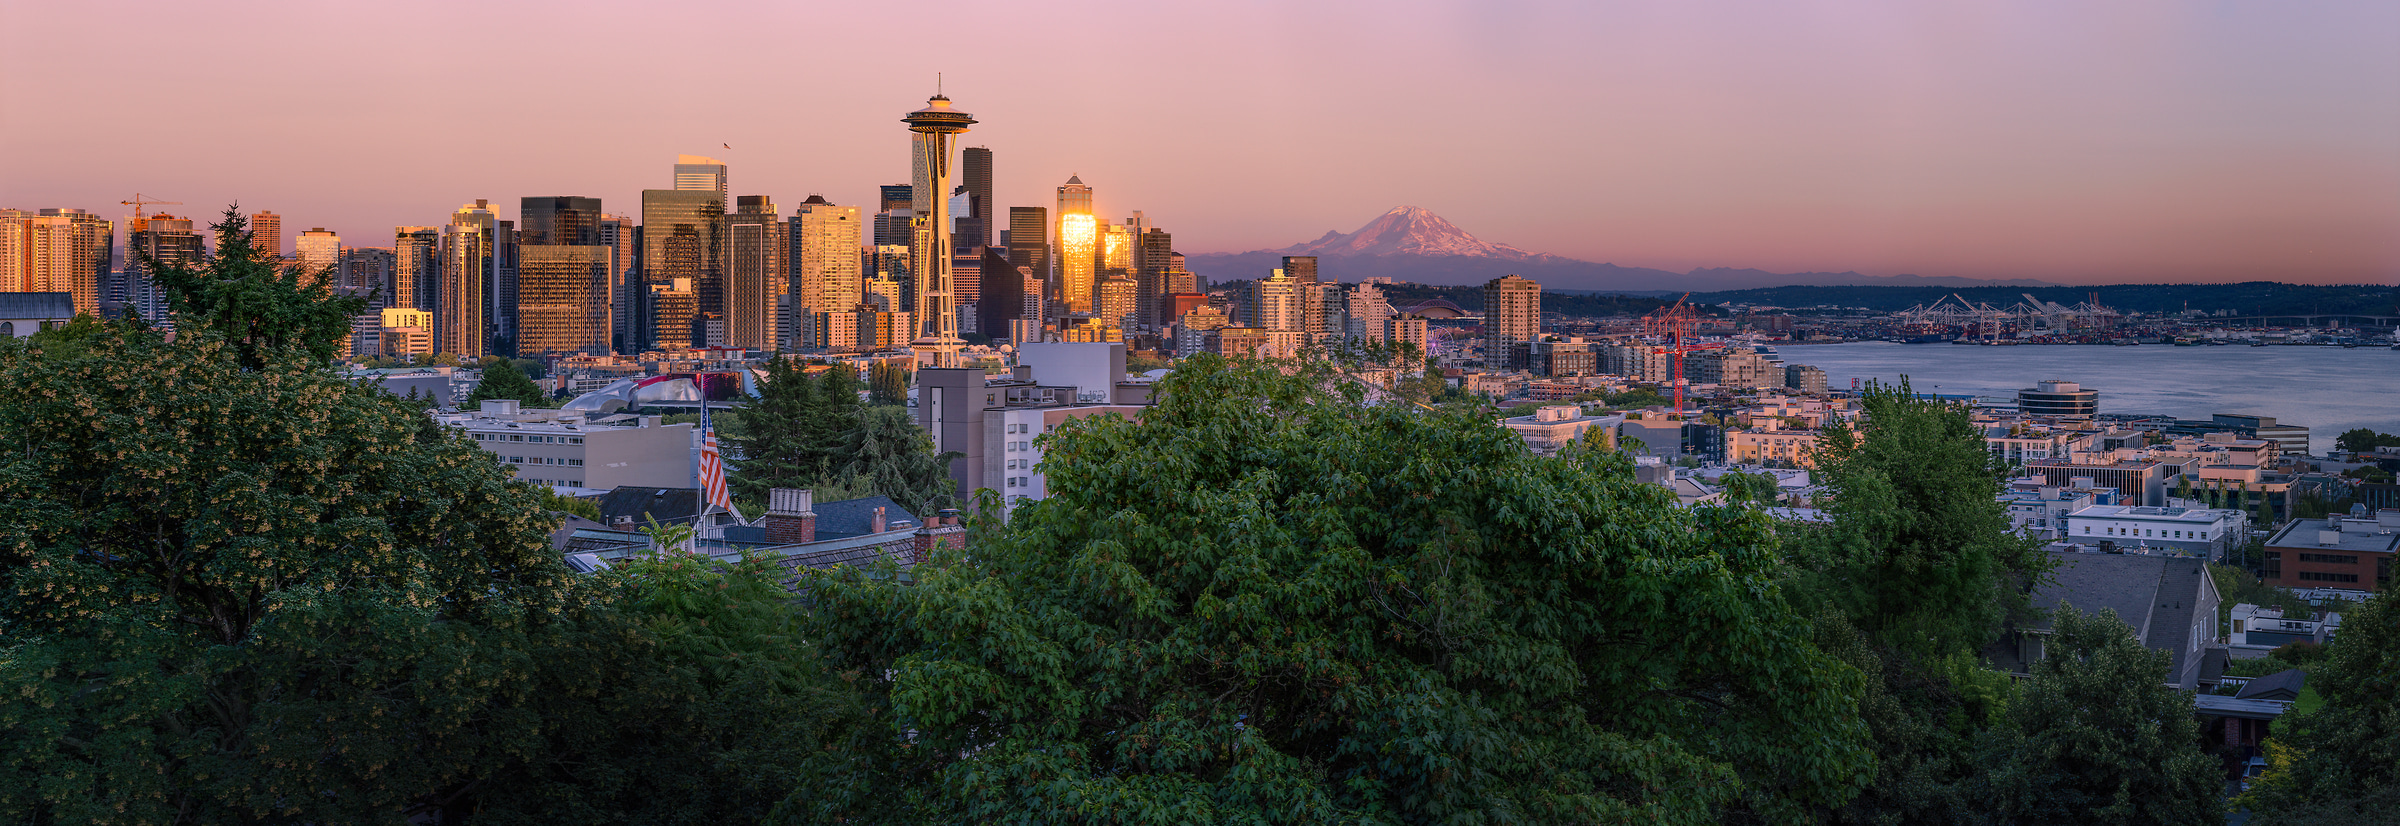 501 megapixels! A very high resolution, large-format VAST photo print of the Seattle skyline at sunset; cityscape photograph created by Chris Blake in Kerry Park, Seattle WA